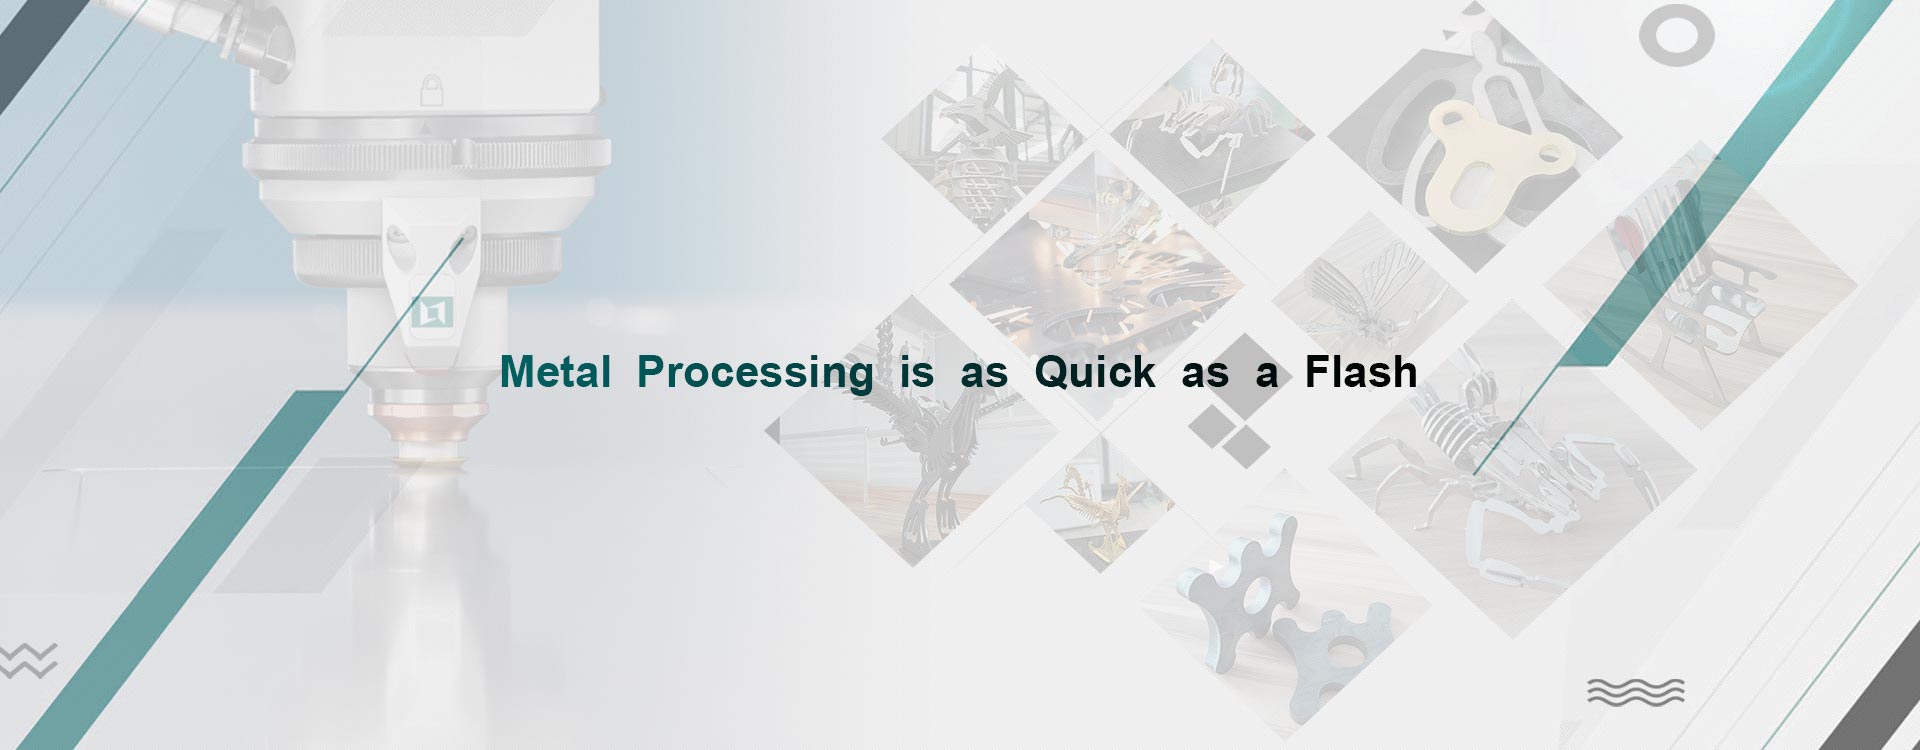 Metal-Processing-is-as-Quick-as-a-Flash-1(1)